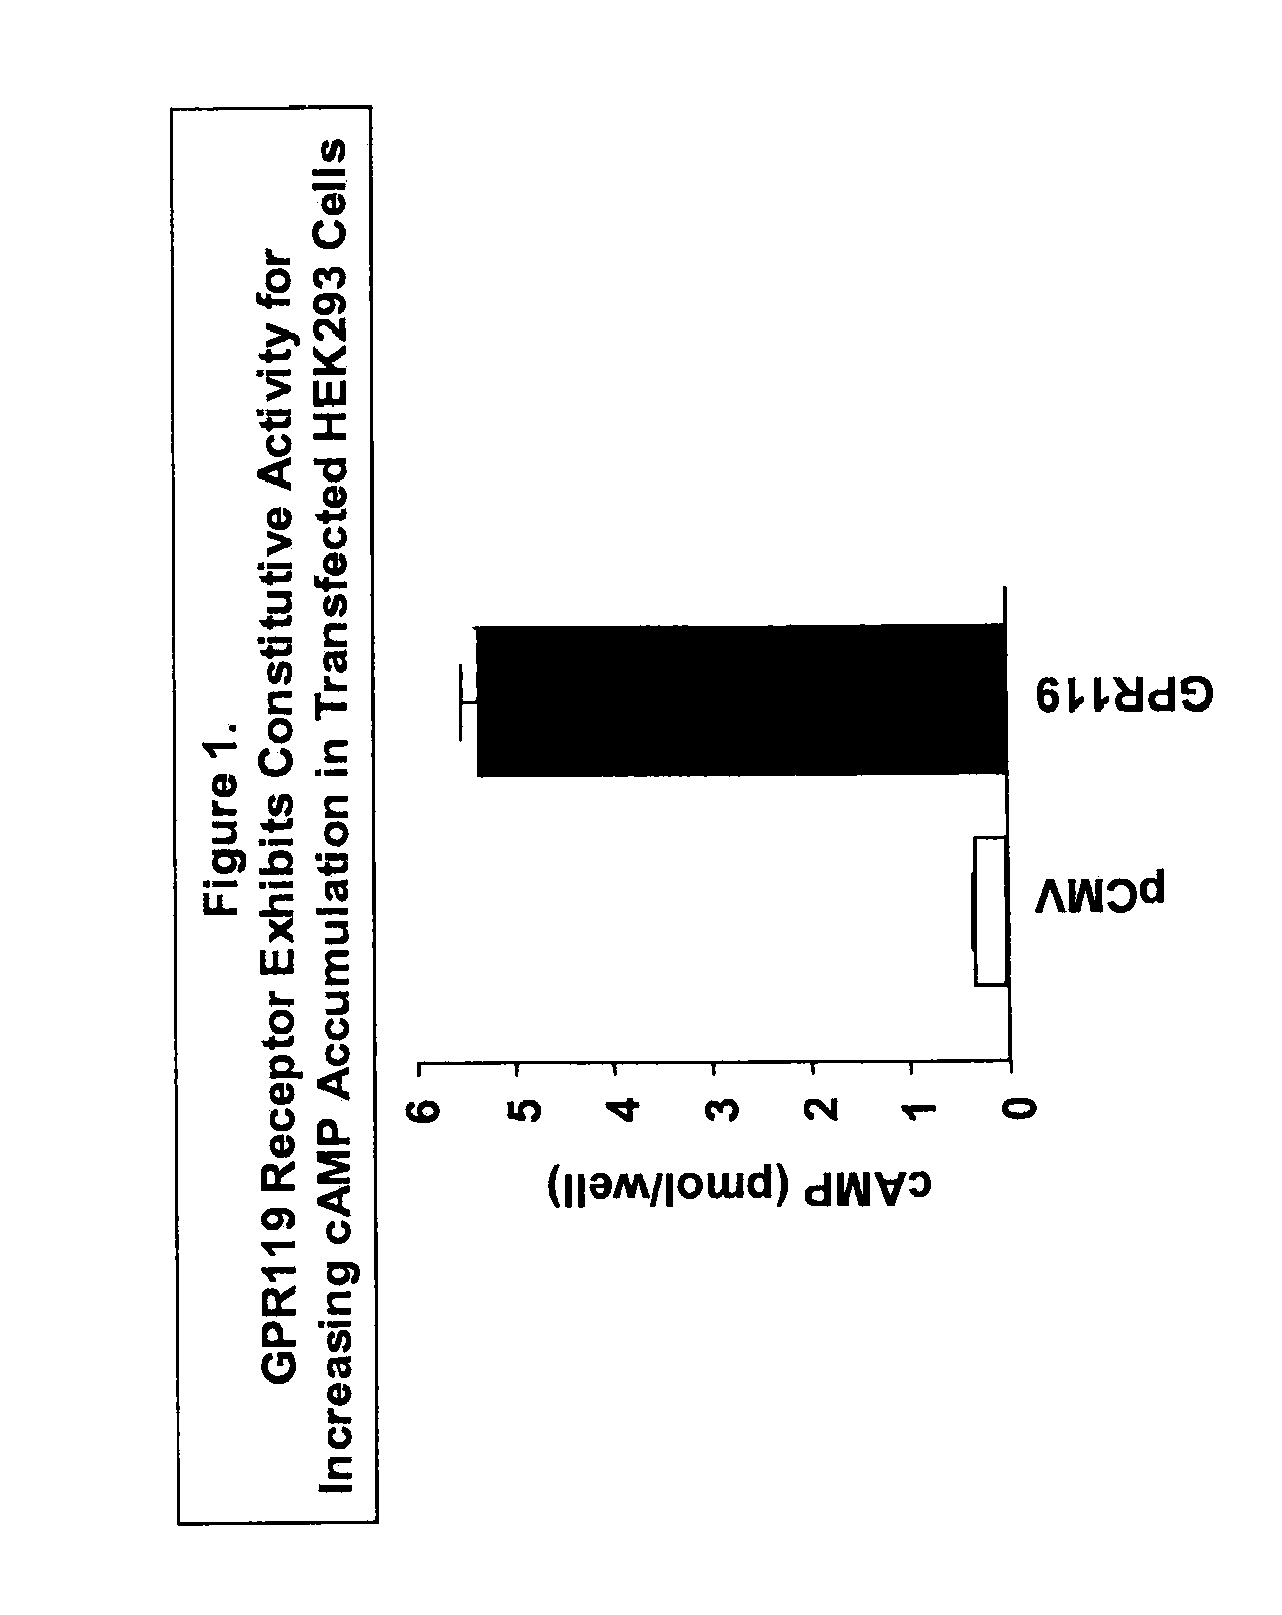 Methods of using a g protein-coupled receptor to identify peptide yy (PYY) secretagogues and compounds useful in the treatment of conditions modulated by pyy